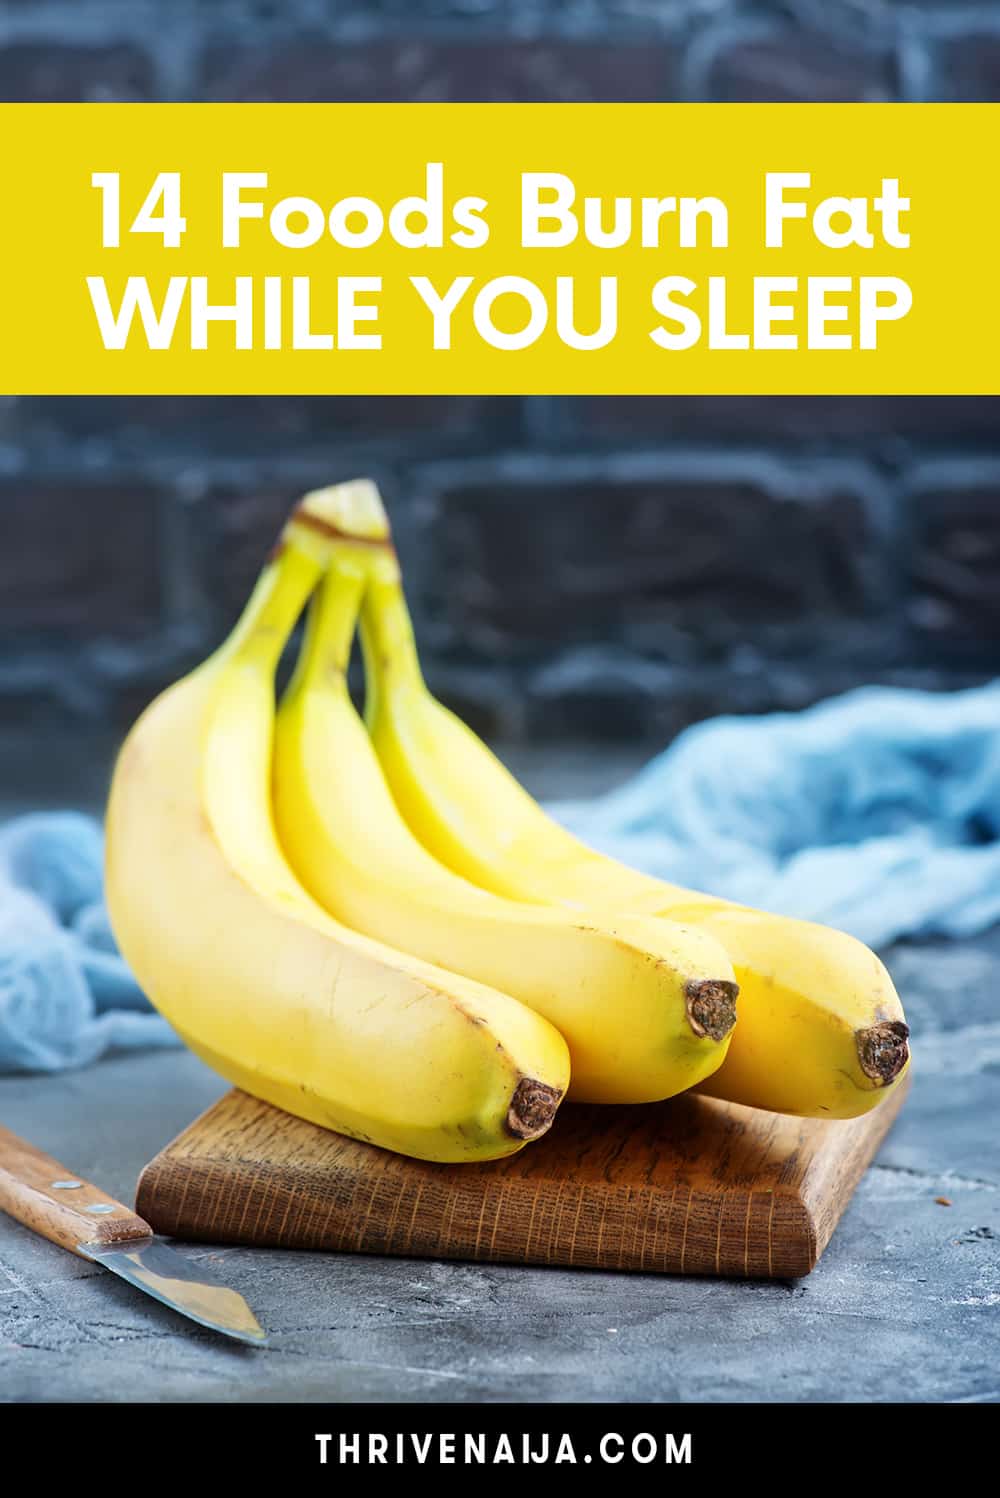 What Foods Burn Fat While You Sleep? Here